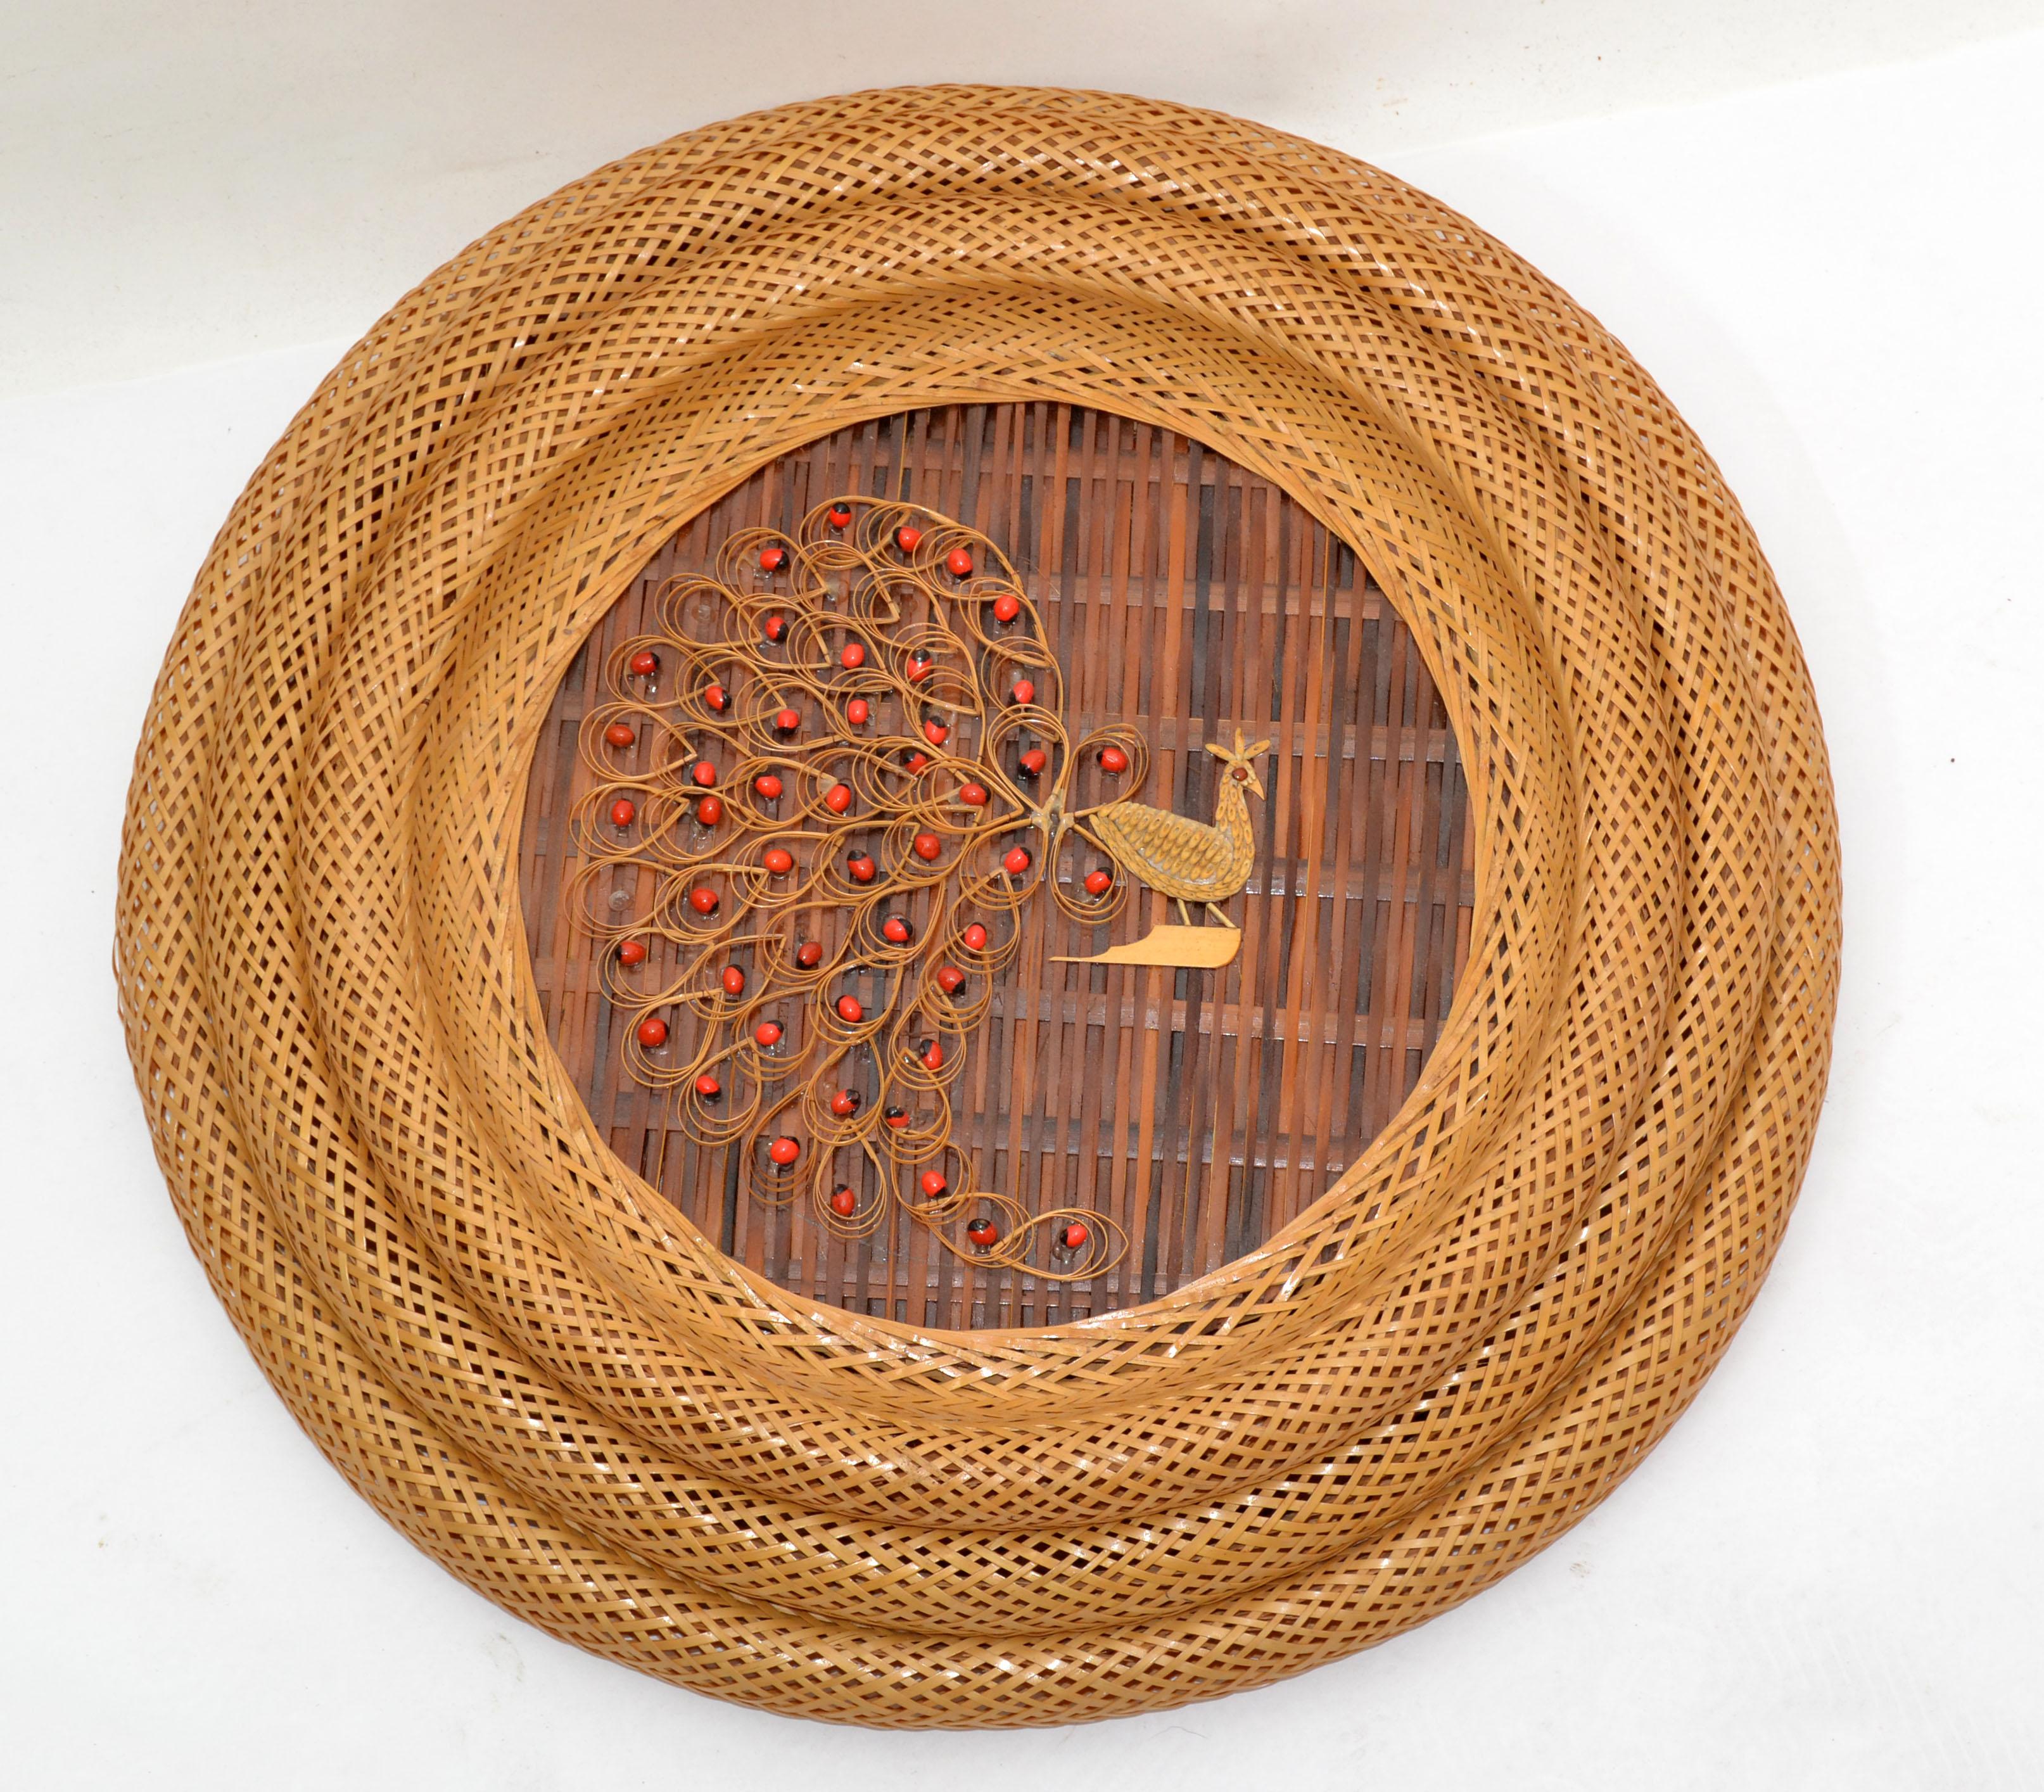 Set of 3 Folk Art wall plates, decoration in rattan & cane with beads.
All hand woven and handcrafted with very small pieces of Material and red Beads.
Each plate has 1 inch height, Diameter's are from 15 to 13.25 to 11.5 inches. 

 